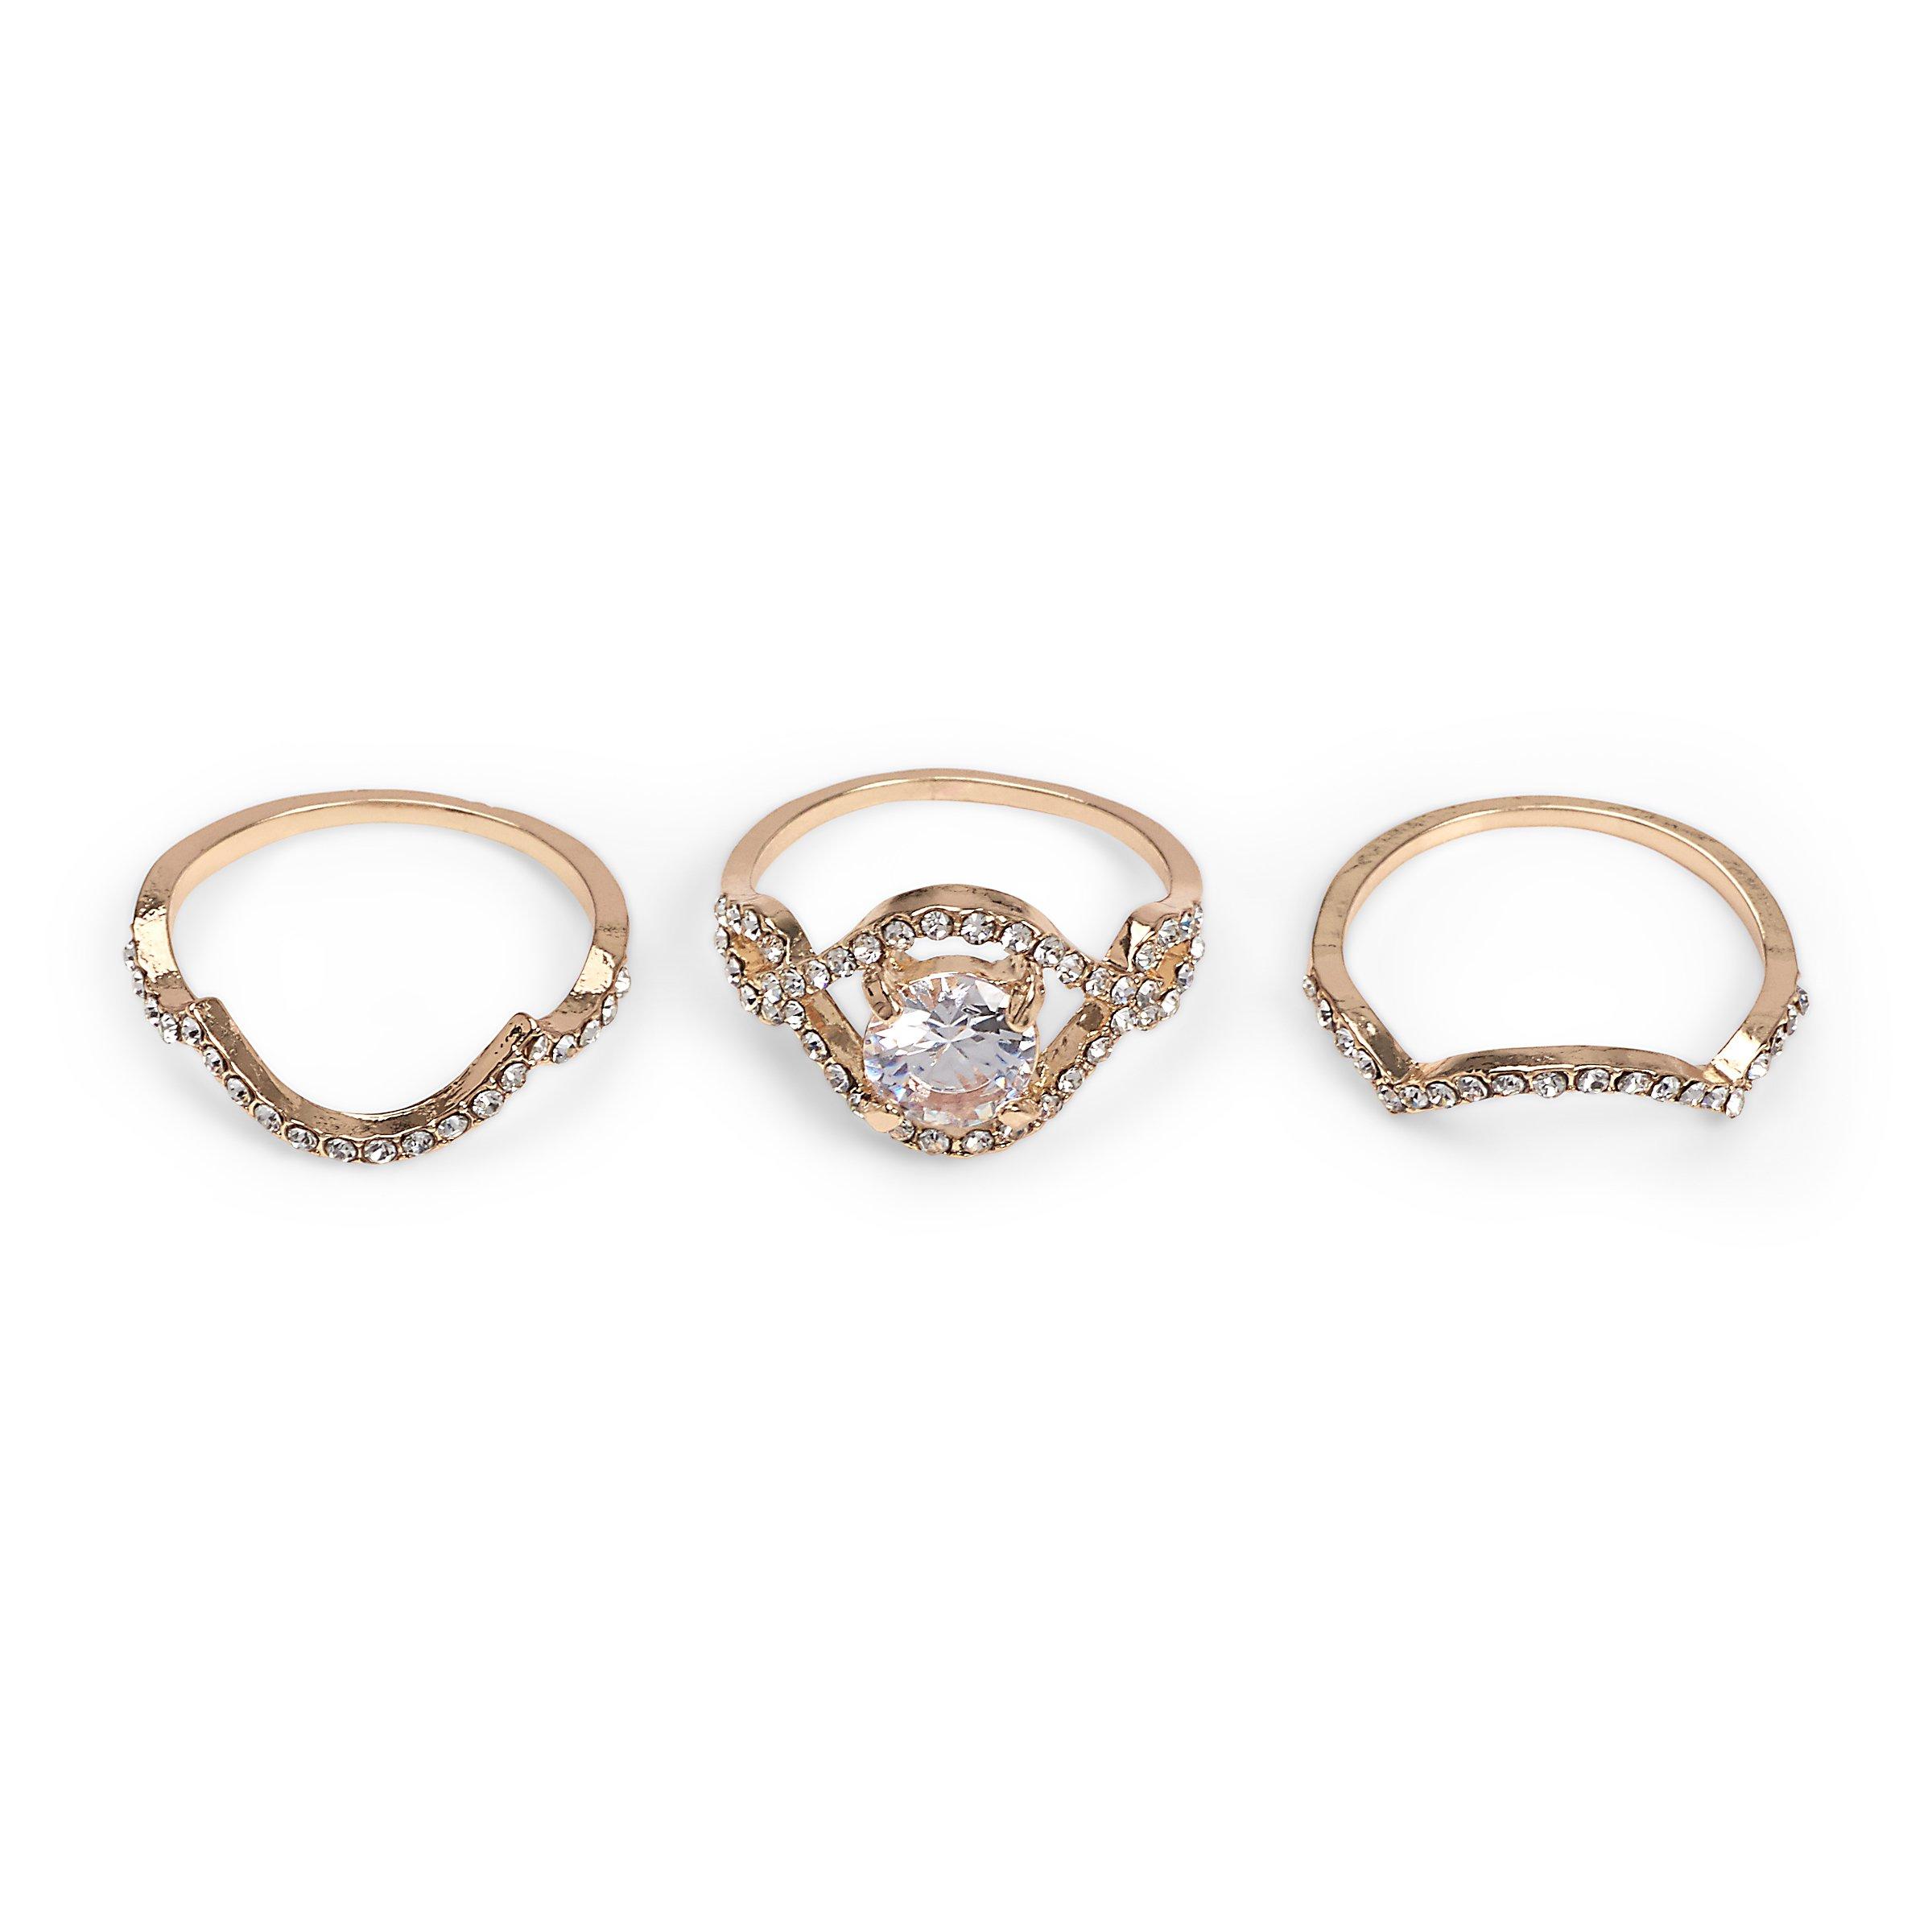 Buy Truworths 3-pack Solitaire Rings Online | Truworths